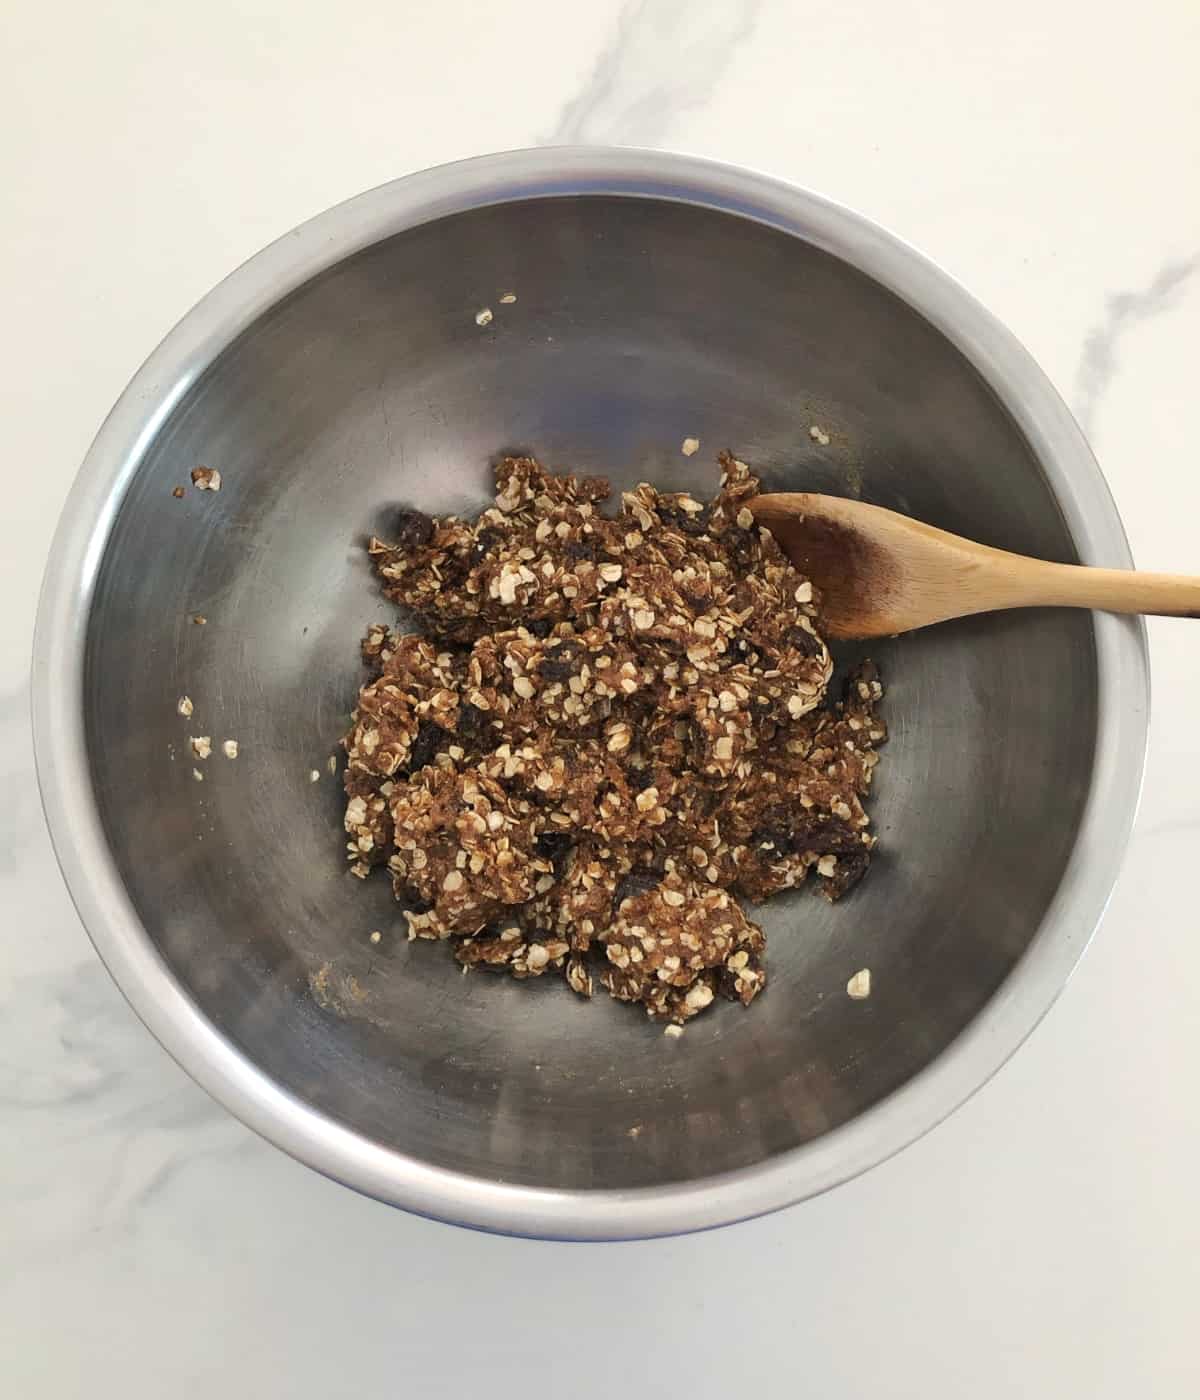 Folding oats and raisins into cookie batter with wooden spoon.